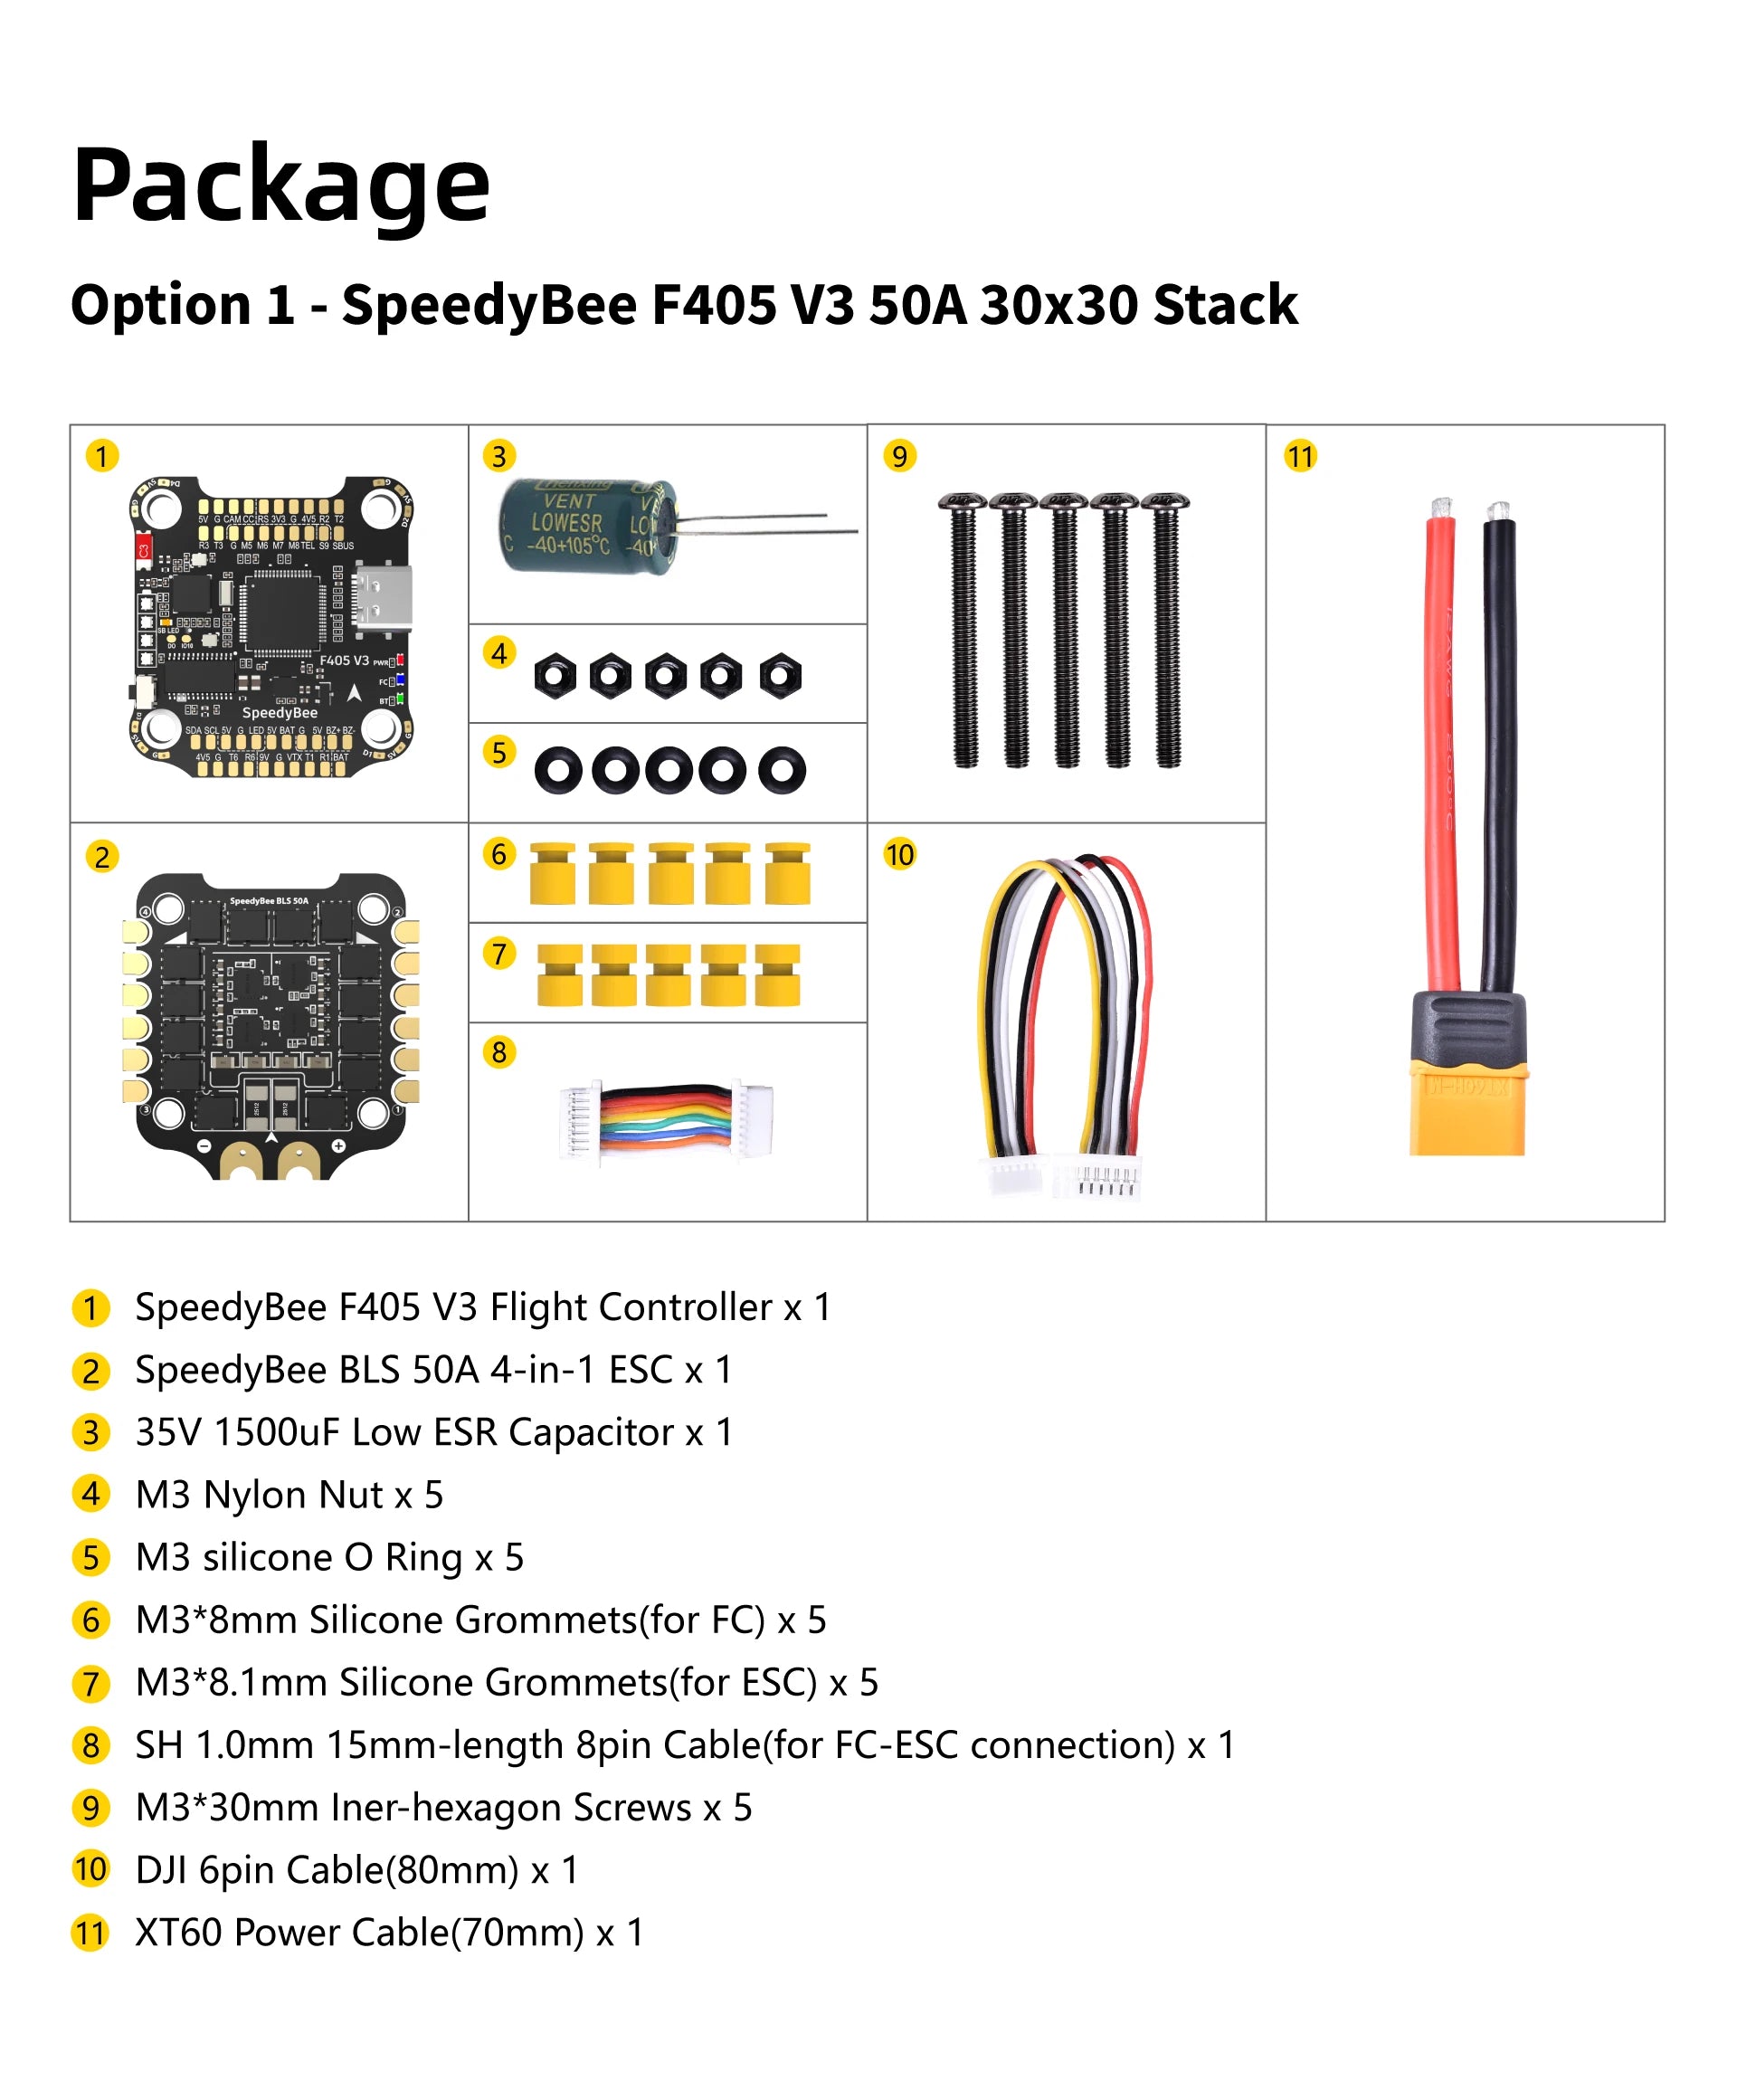 SpeedyBee F405 V3 BLS 50A 30x30 FC&ESC Stack, Designed for receiver and GPS module even when the FC is powered through the USB port